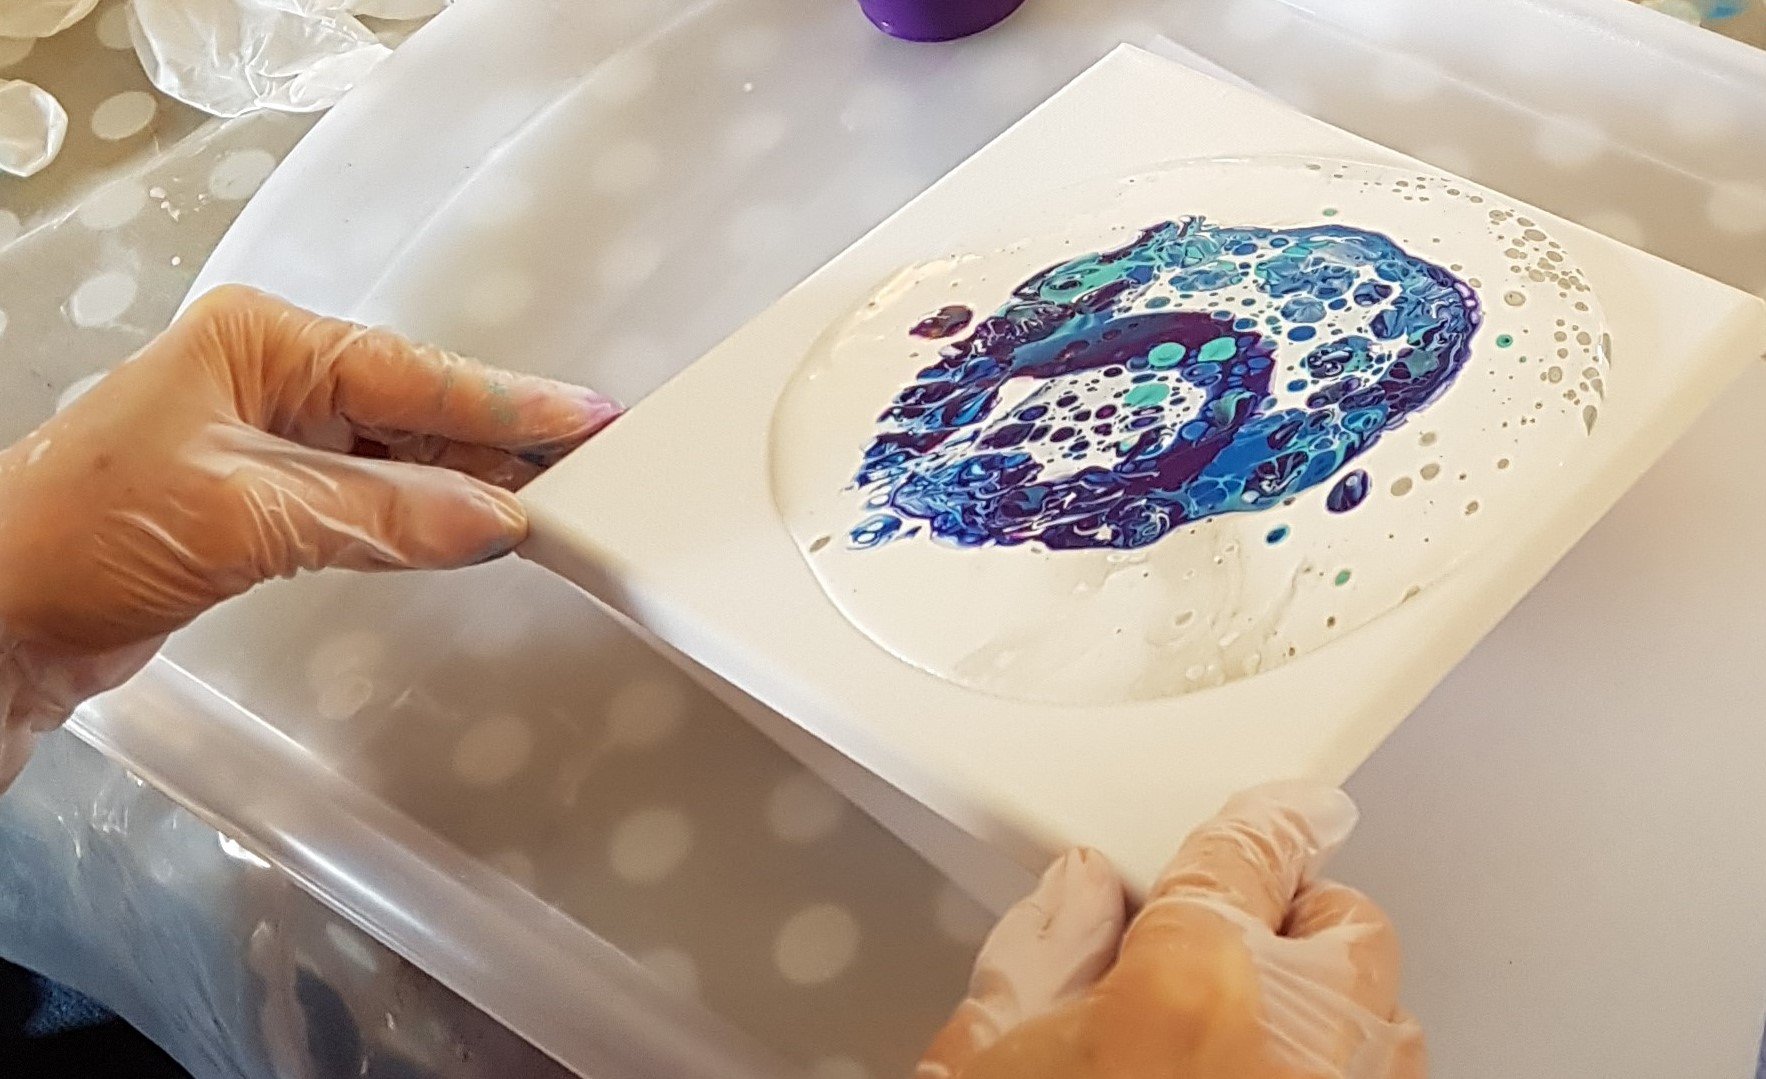 Paint pouring introduction - Bracknell